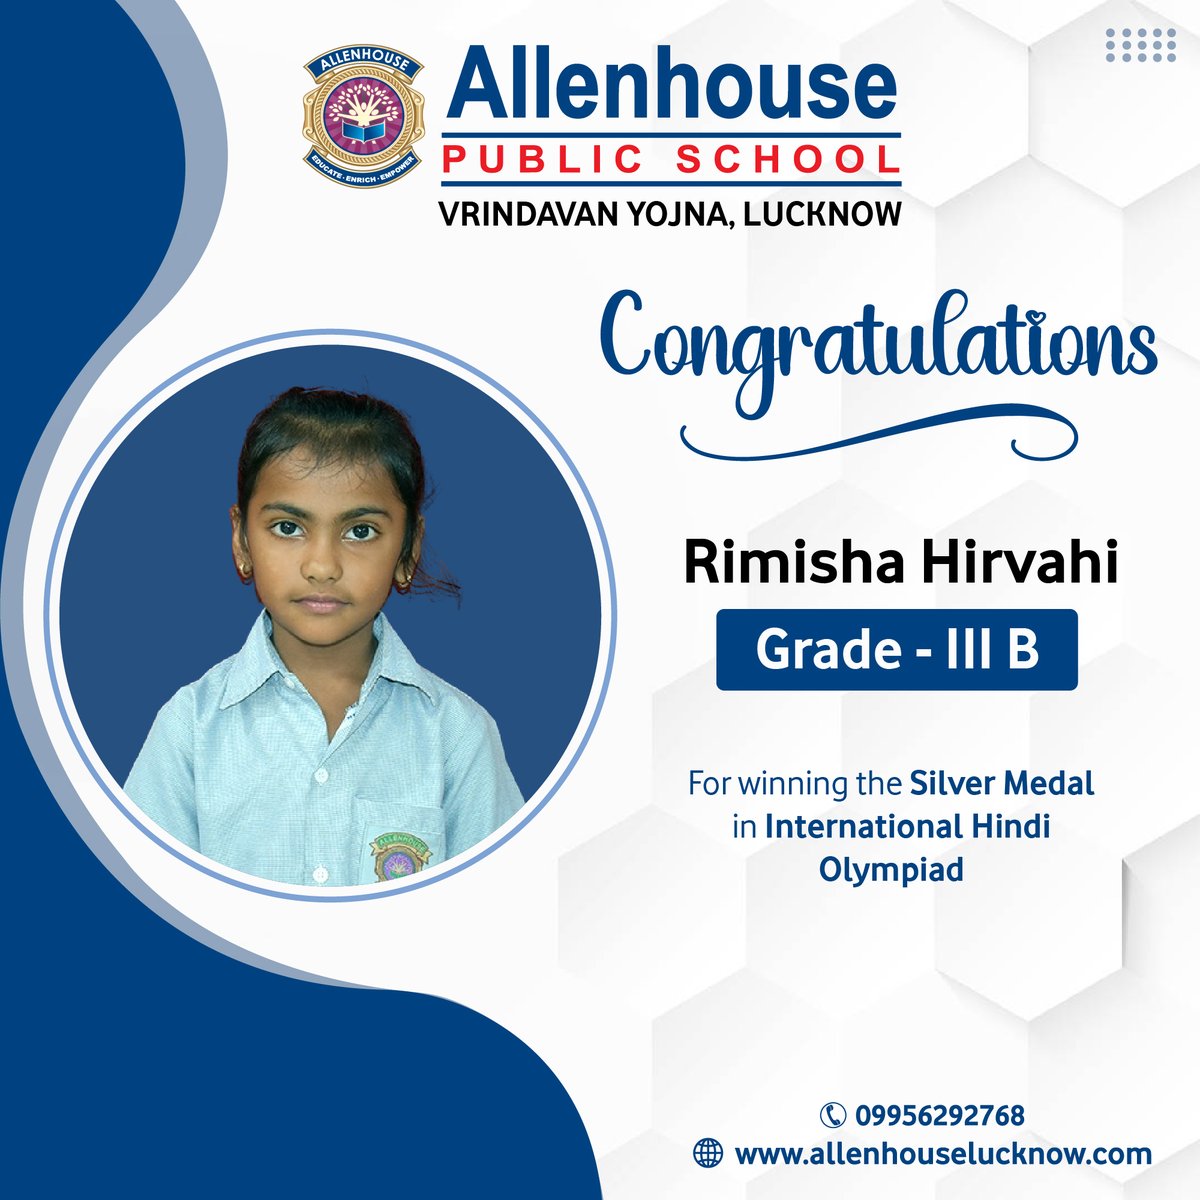 📷'Just clinched Silver at the International Hindi Olympiad!' 📷
…nhouselucknow.admission-enquiries.com/Site/Admission…
#SilverMedal #HindiChampion #AllenHousePublicSchool #allenhousepublicschoollucknow #Allenhousegroup #bestschoolinindia #BestCBSESchoolinup #admissionsopen #Bestschoolinlucknow #Top10School